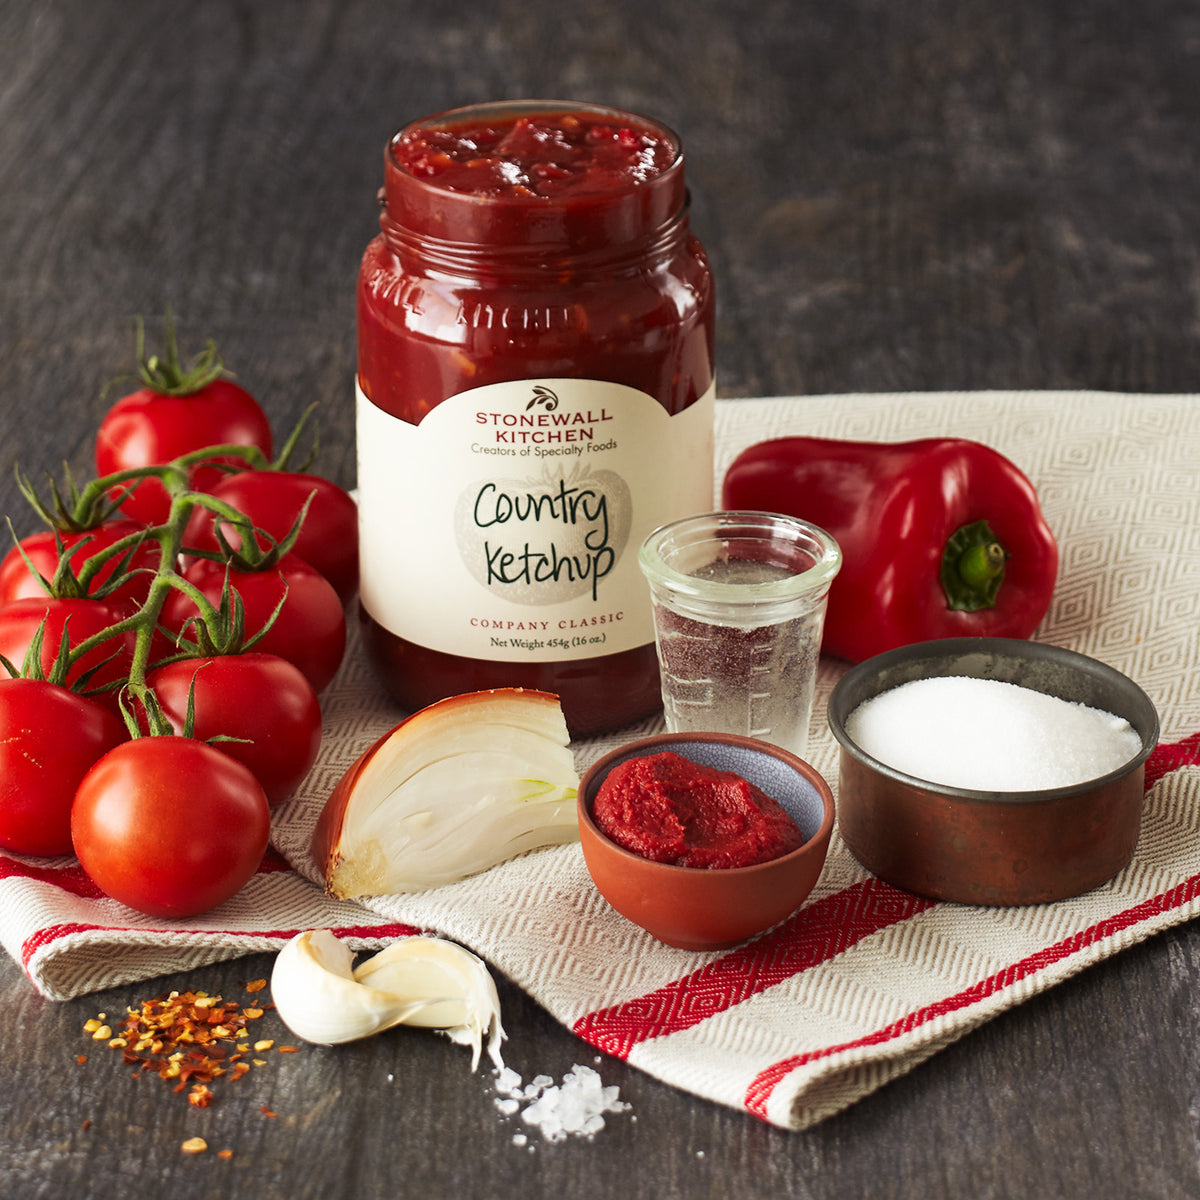 Photo Of A Jar Of Stonewall Kitchen Country Ketchup Surrounded By Ingredients Used In Making It Including Tomatoes Garlic Red Pepper Flakes Salt Onion, Sugar, Red Pepper, and Oil